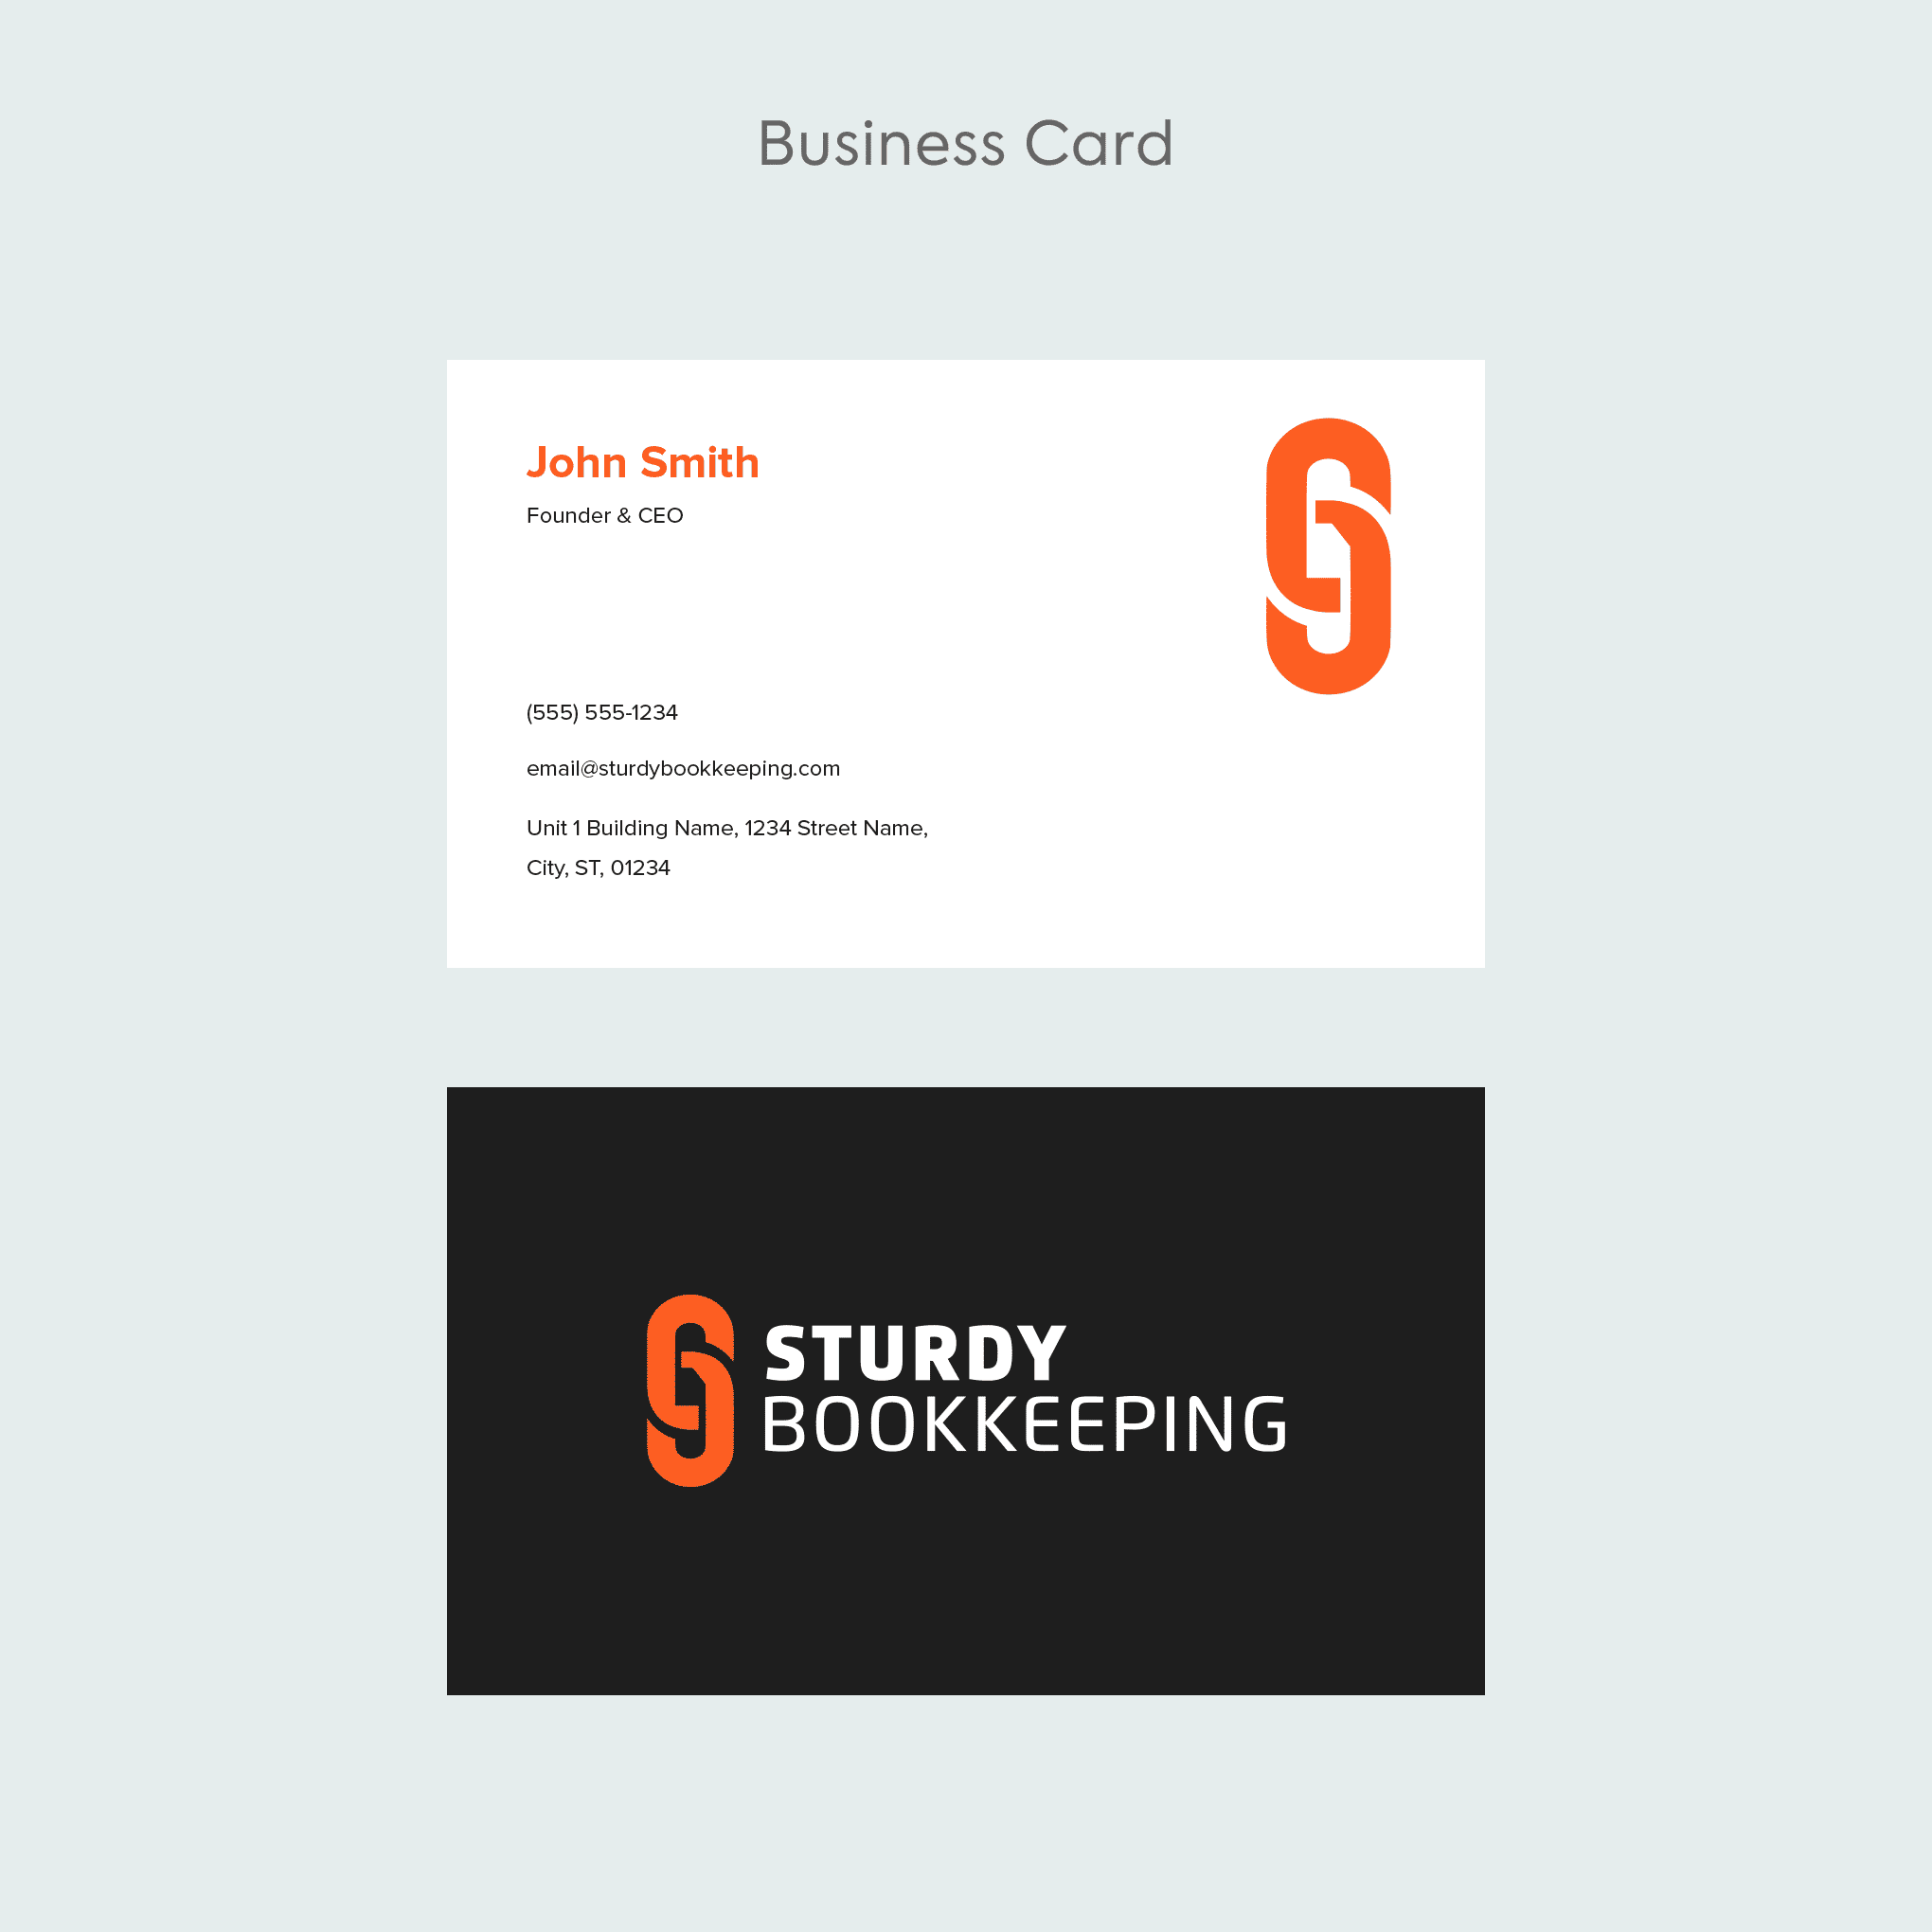 04 - Business Card Template (4)